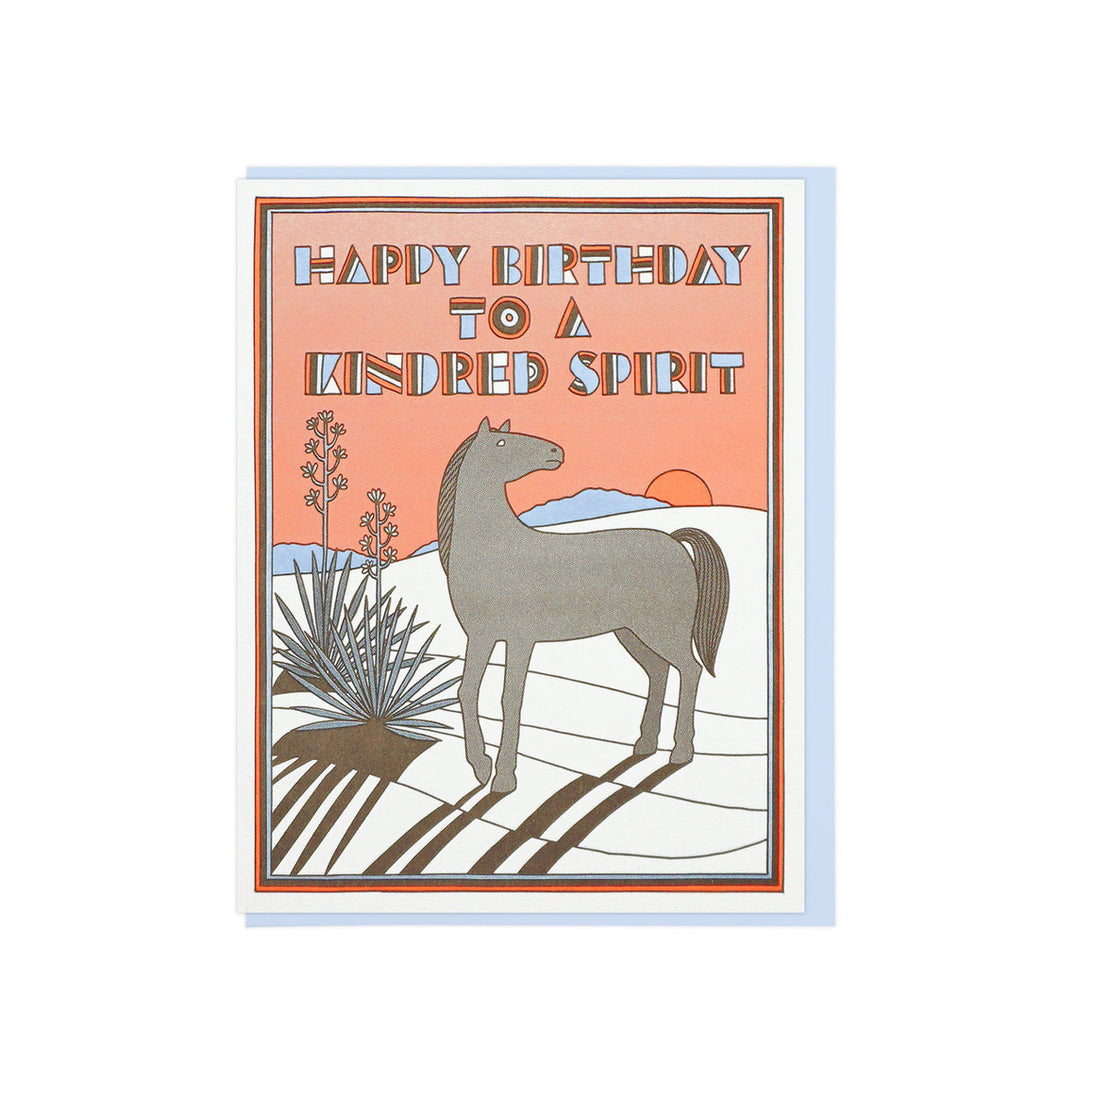 Happy Birthday To A Kindred Spirit, Lucky Horse Press